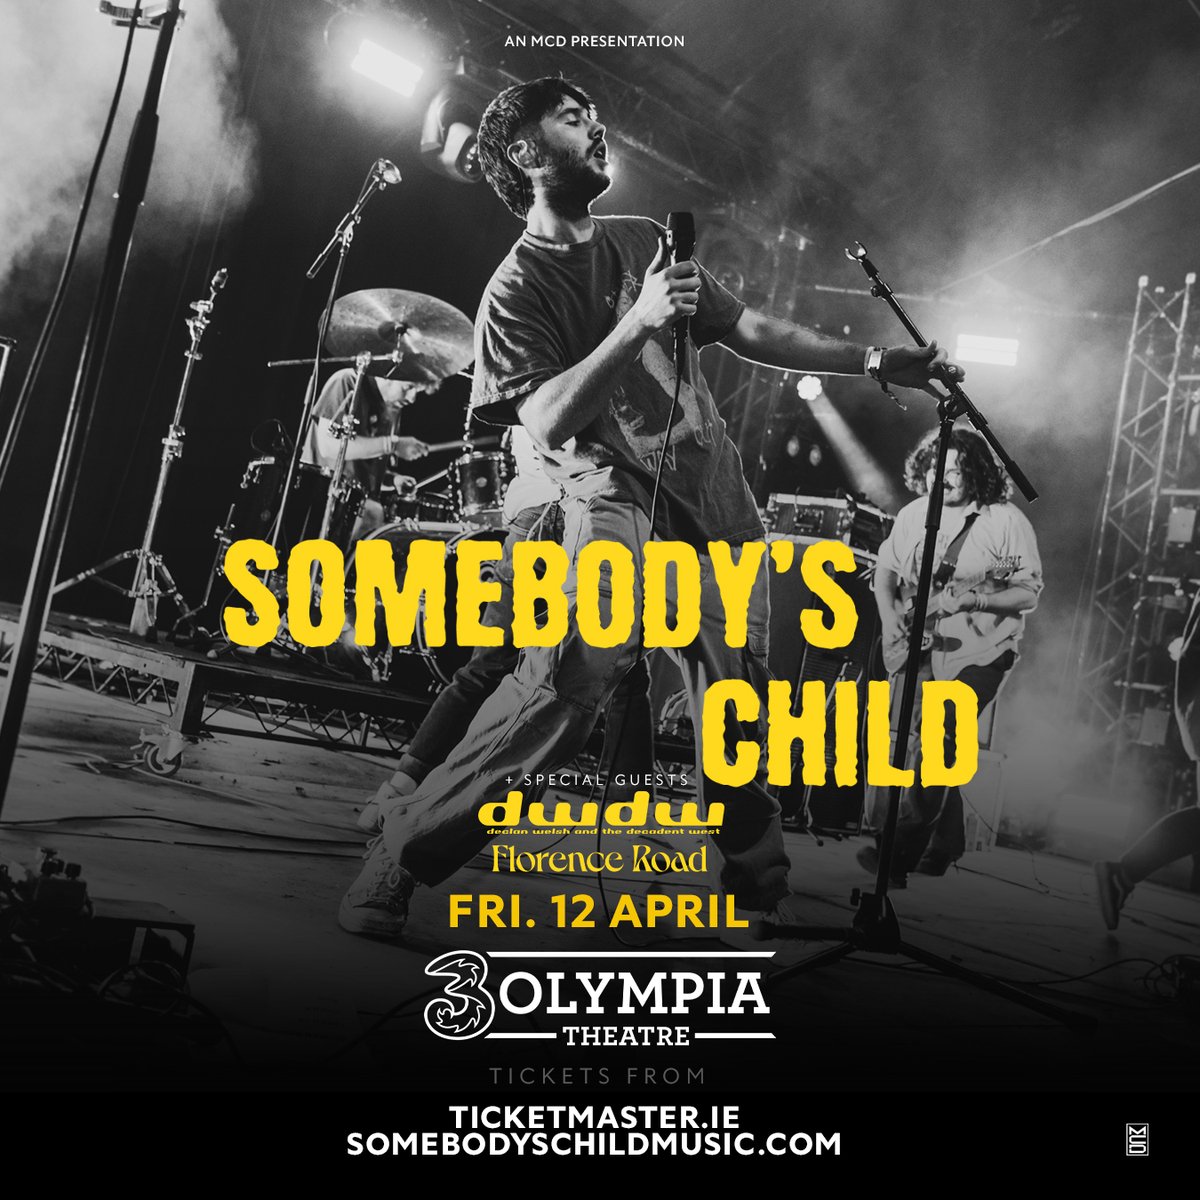 🔥New Music Friday!🔥 Ireland’s @SomebodysChild1 release a brand new single entitled “Oh Emily” today. The song is set to be a one-off release between albums. Listen here: s.disco.ac/nkubckjtunvi Book tickets via @TicketmasterIre here: 3olympia.ie/whats-on/someb…